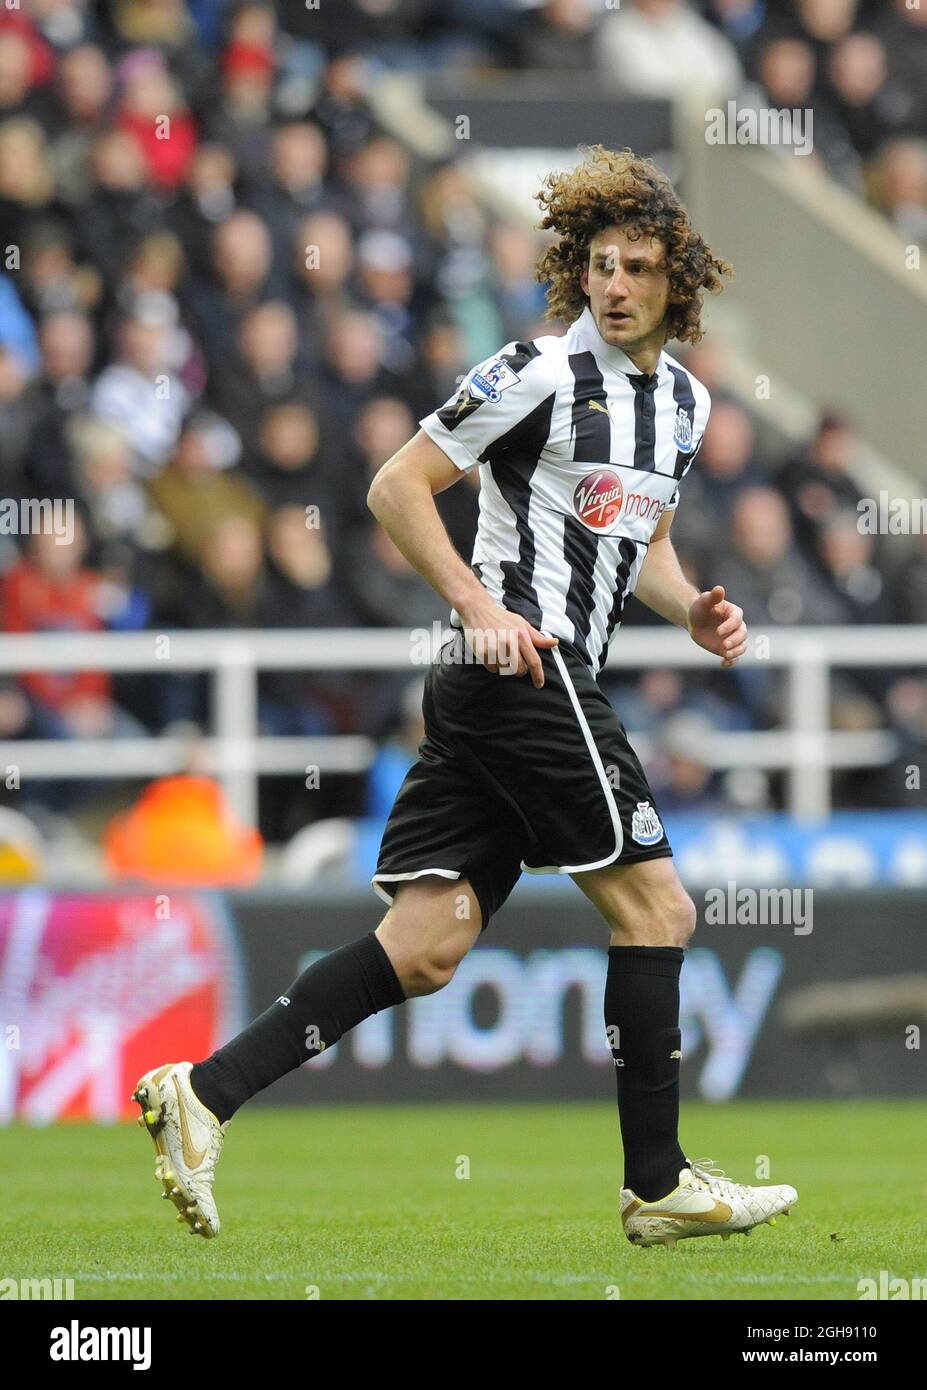 Fabricio Coloccini of Newcastle United during the Barclays Premier League soccer match between Newcastle Utd and Chelsea at St. James' Park in Newcastle, United Kingdom on February 02, 2013. Stock Photo